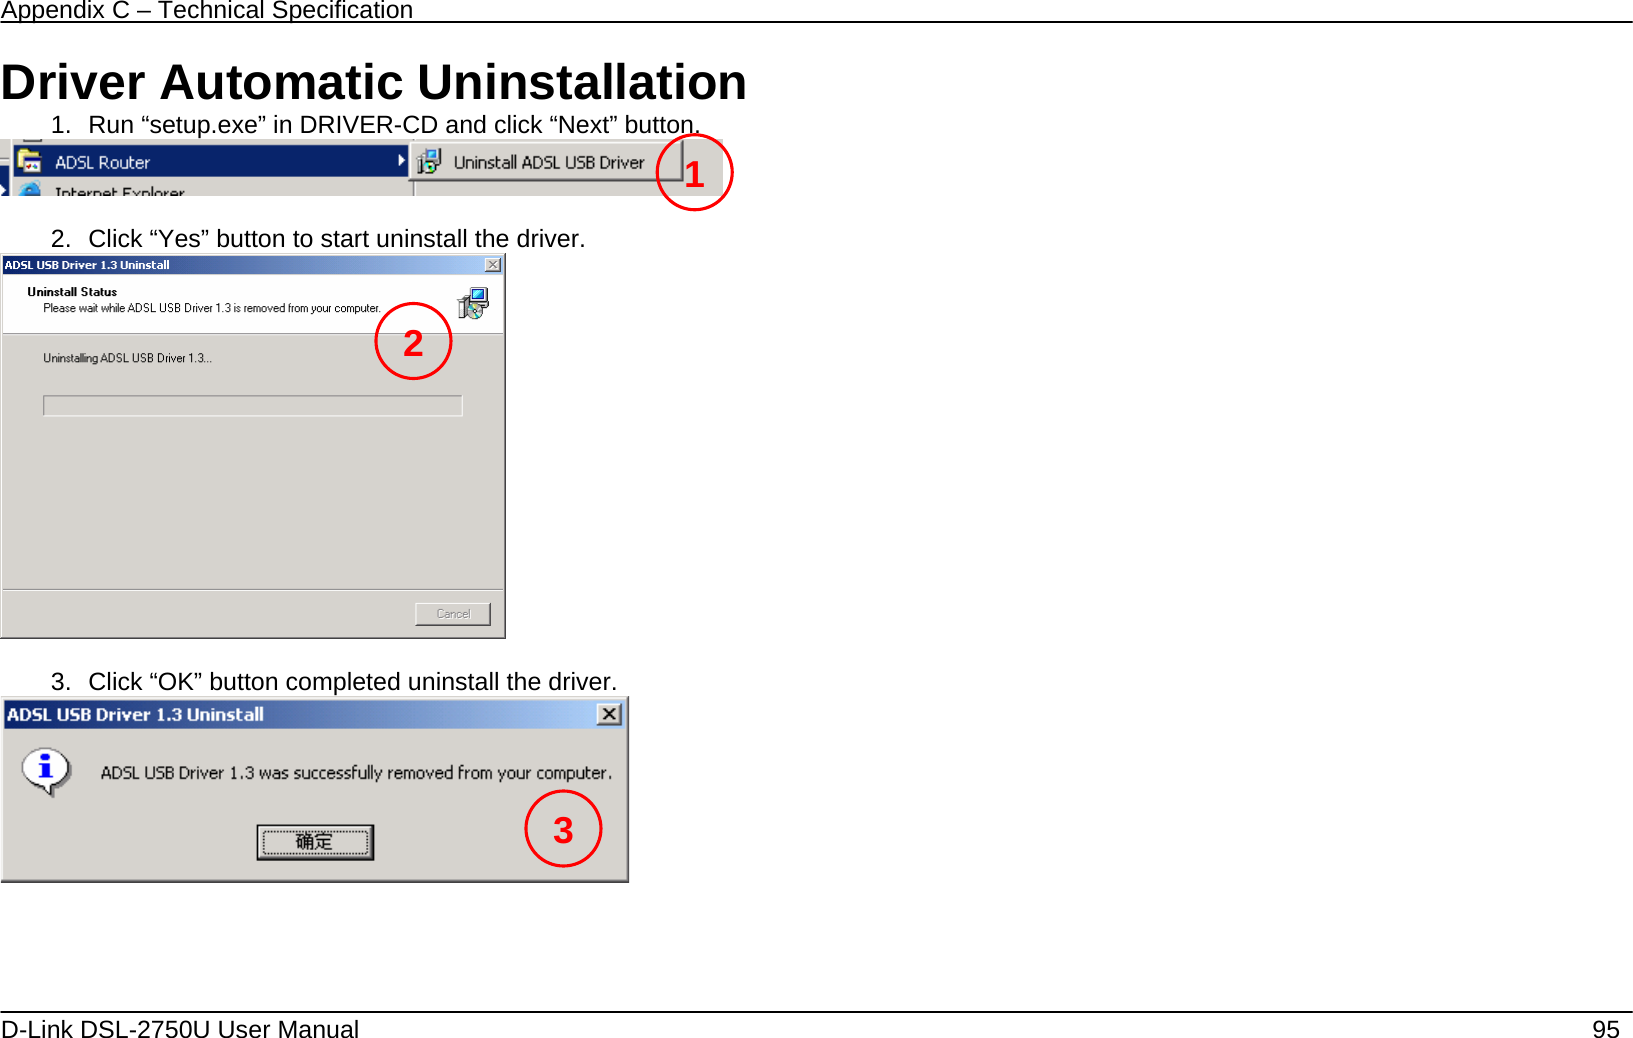 Appendix C – Technical Specification   D-Link DSL-2750U User Manual    95 Driver Automatic Uninstallation 1.  Run “setup.exe” in DRIVER-CD and click “Next” button.   2.  Click “Yes” button to start uninstall the driver.     3.  Click “OK” button completed uninstall the driver.       12 3